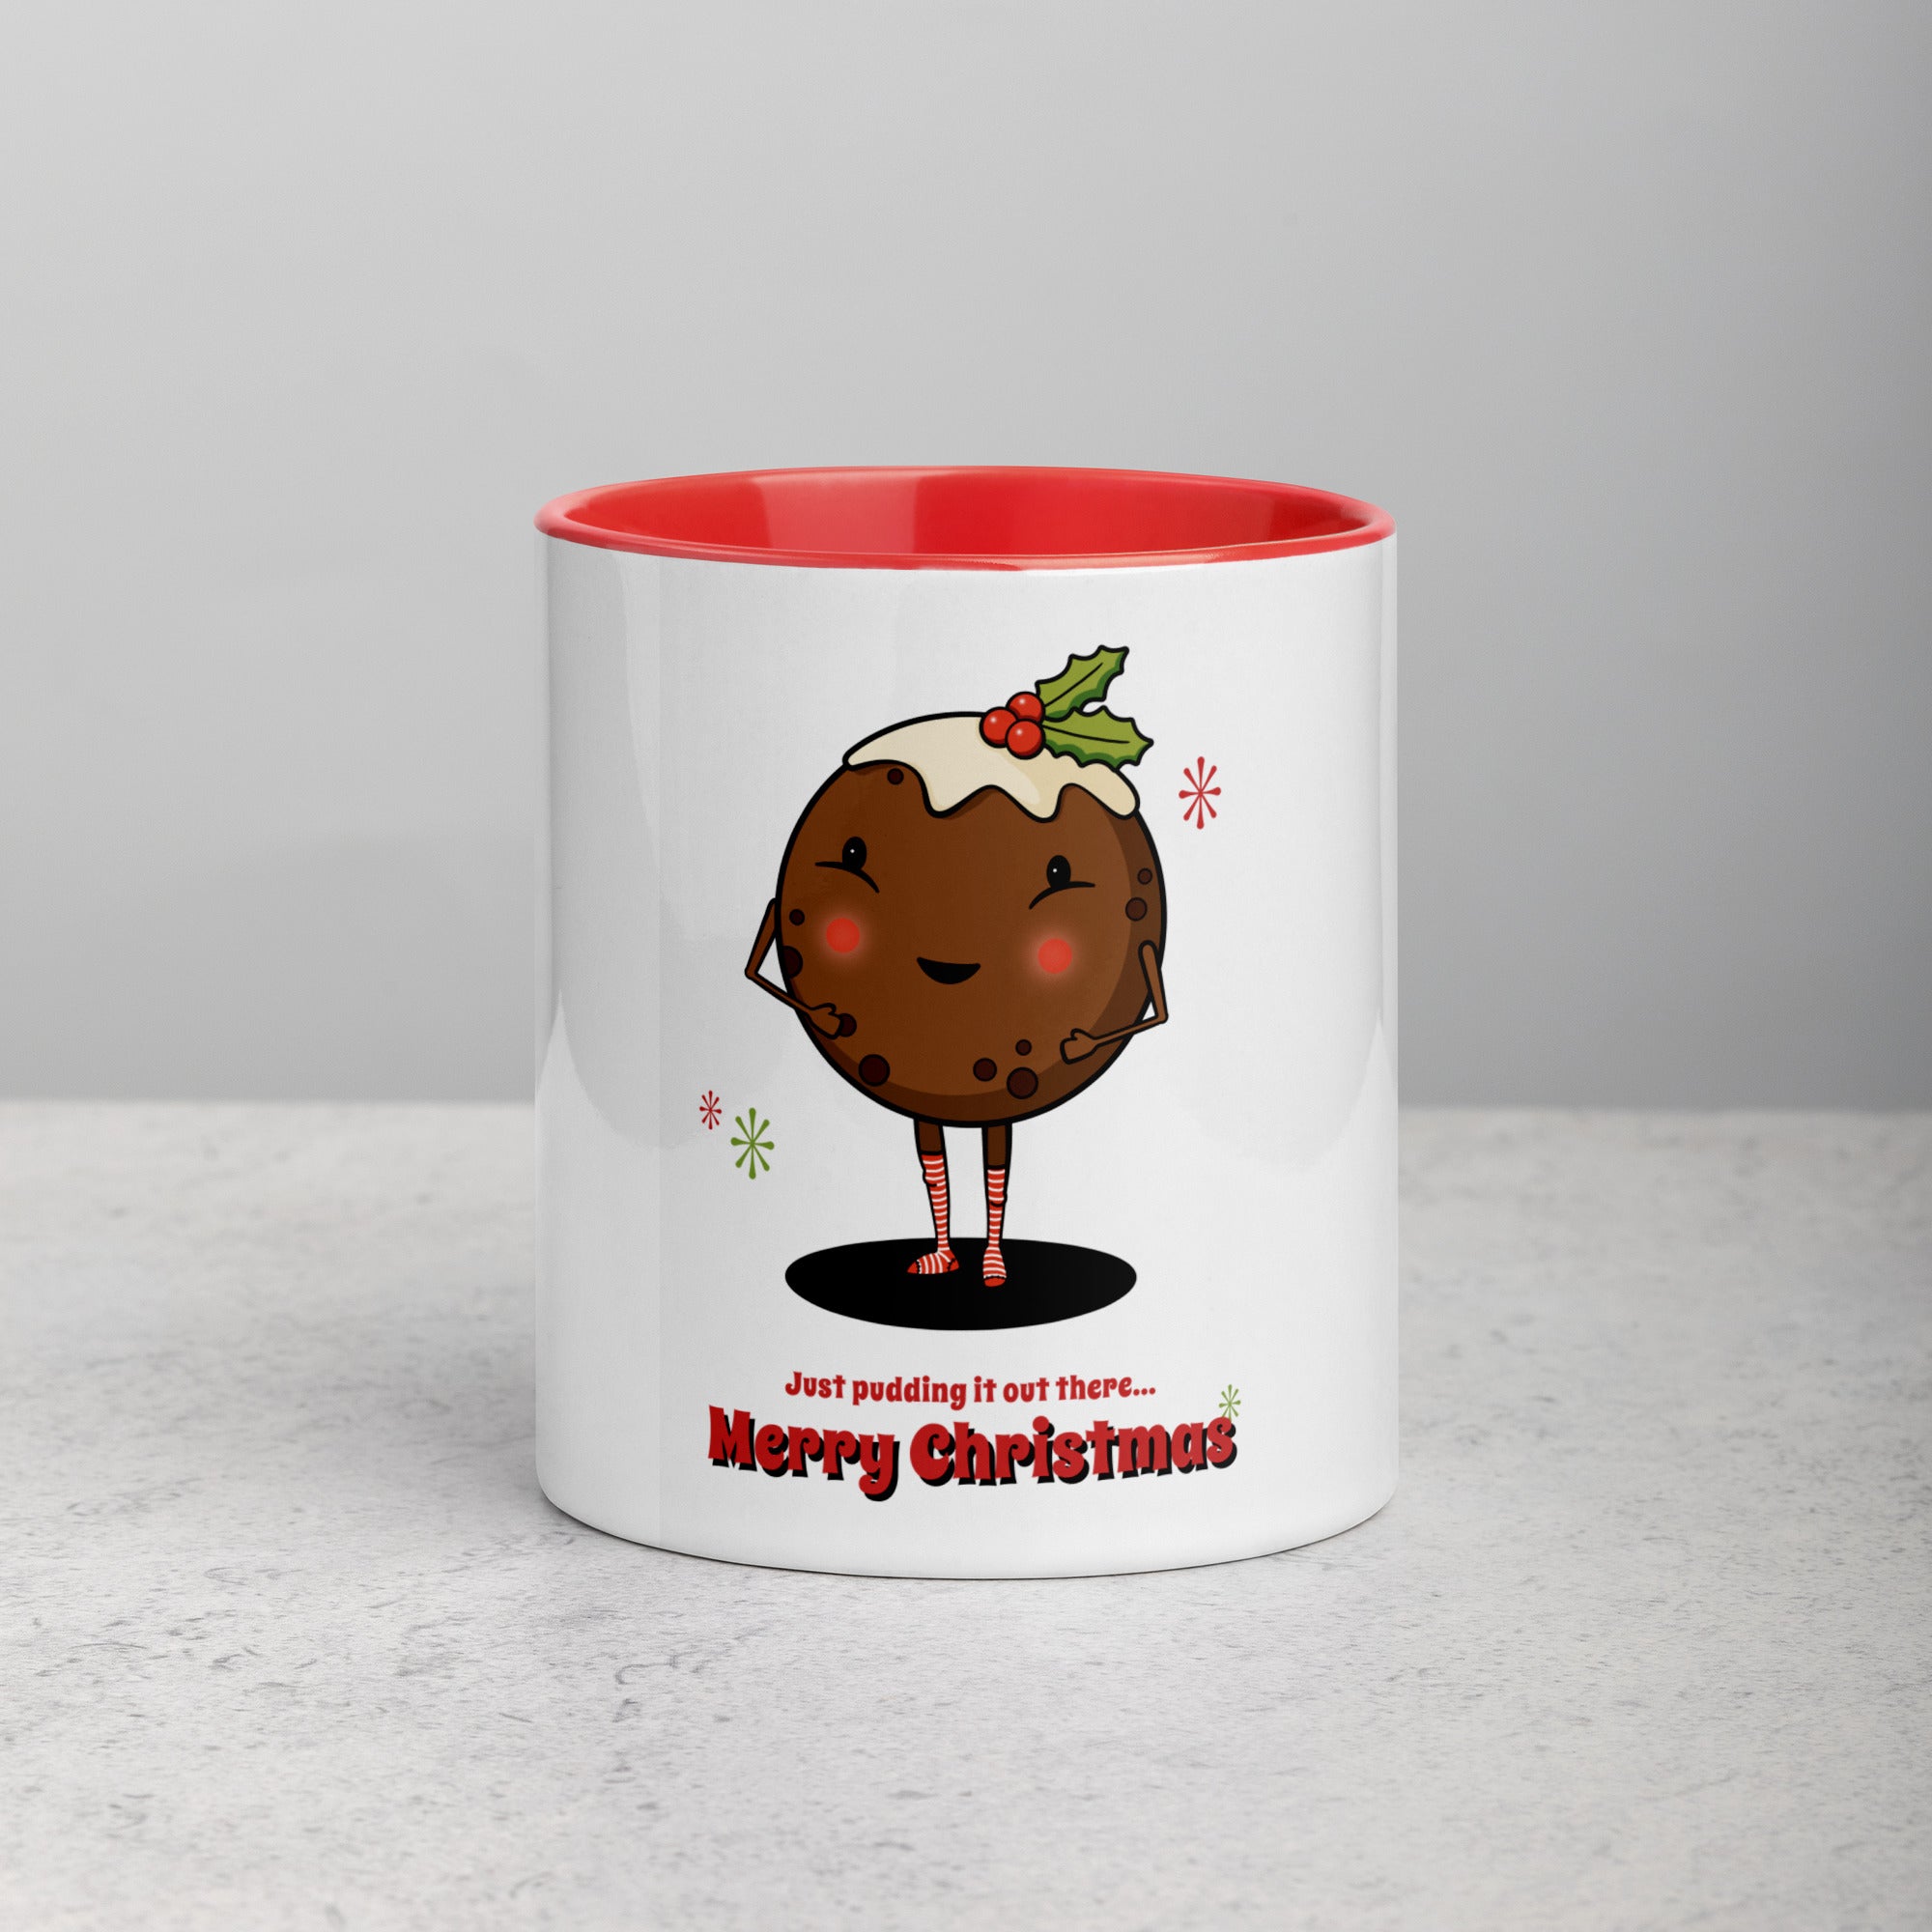 front facing white mug with red interior and handle. Mug has illustration of cute Christmas Pudding character with a custard and Christmas holly hat wearing red and white striped socks with the text Just Pudding it Out there - Merry Christmas